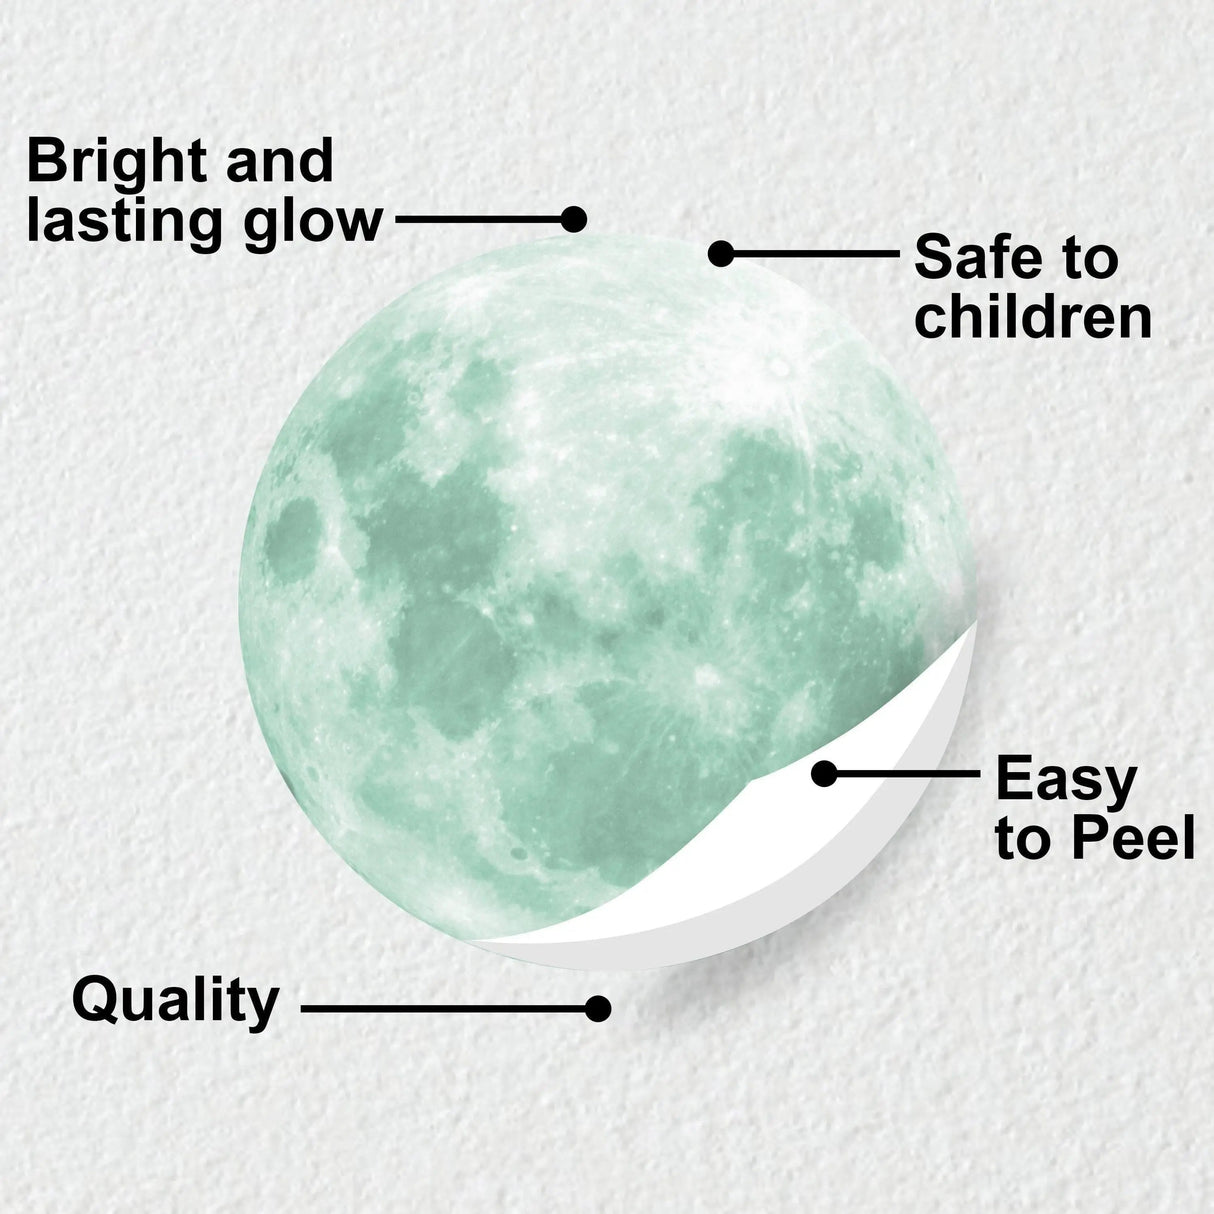 Glow In The Dark Moon Wall Sticker - Glowing Ceiling Decal For Kid Room Bedroom The Light Decor - 3d Large Vinyl Full Night Decoration Art - Decords